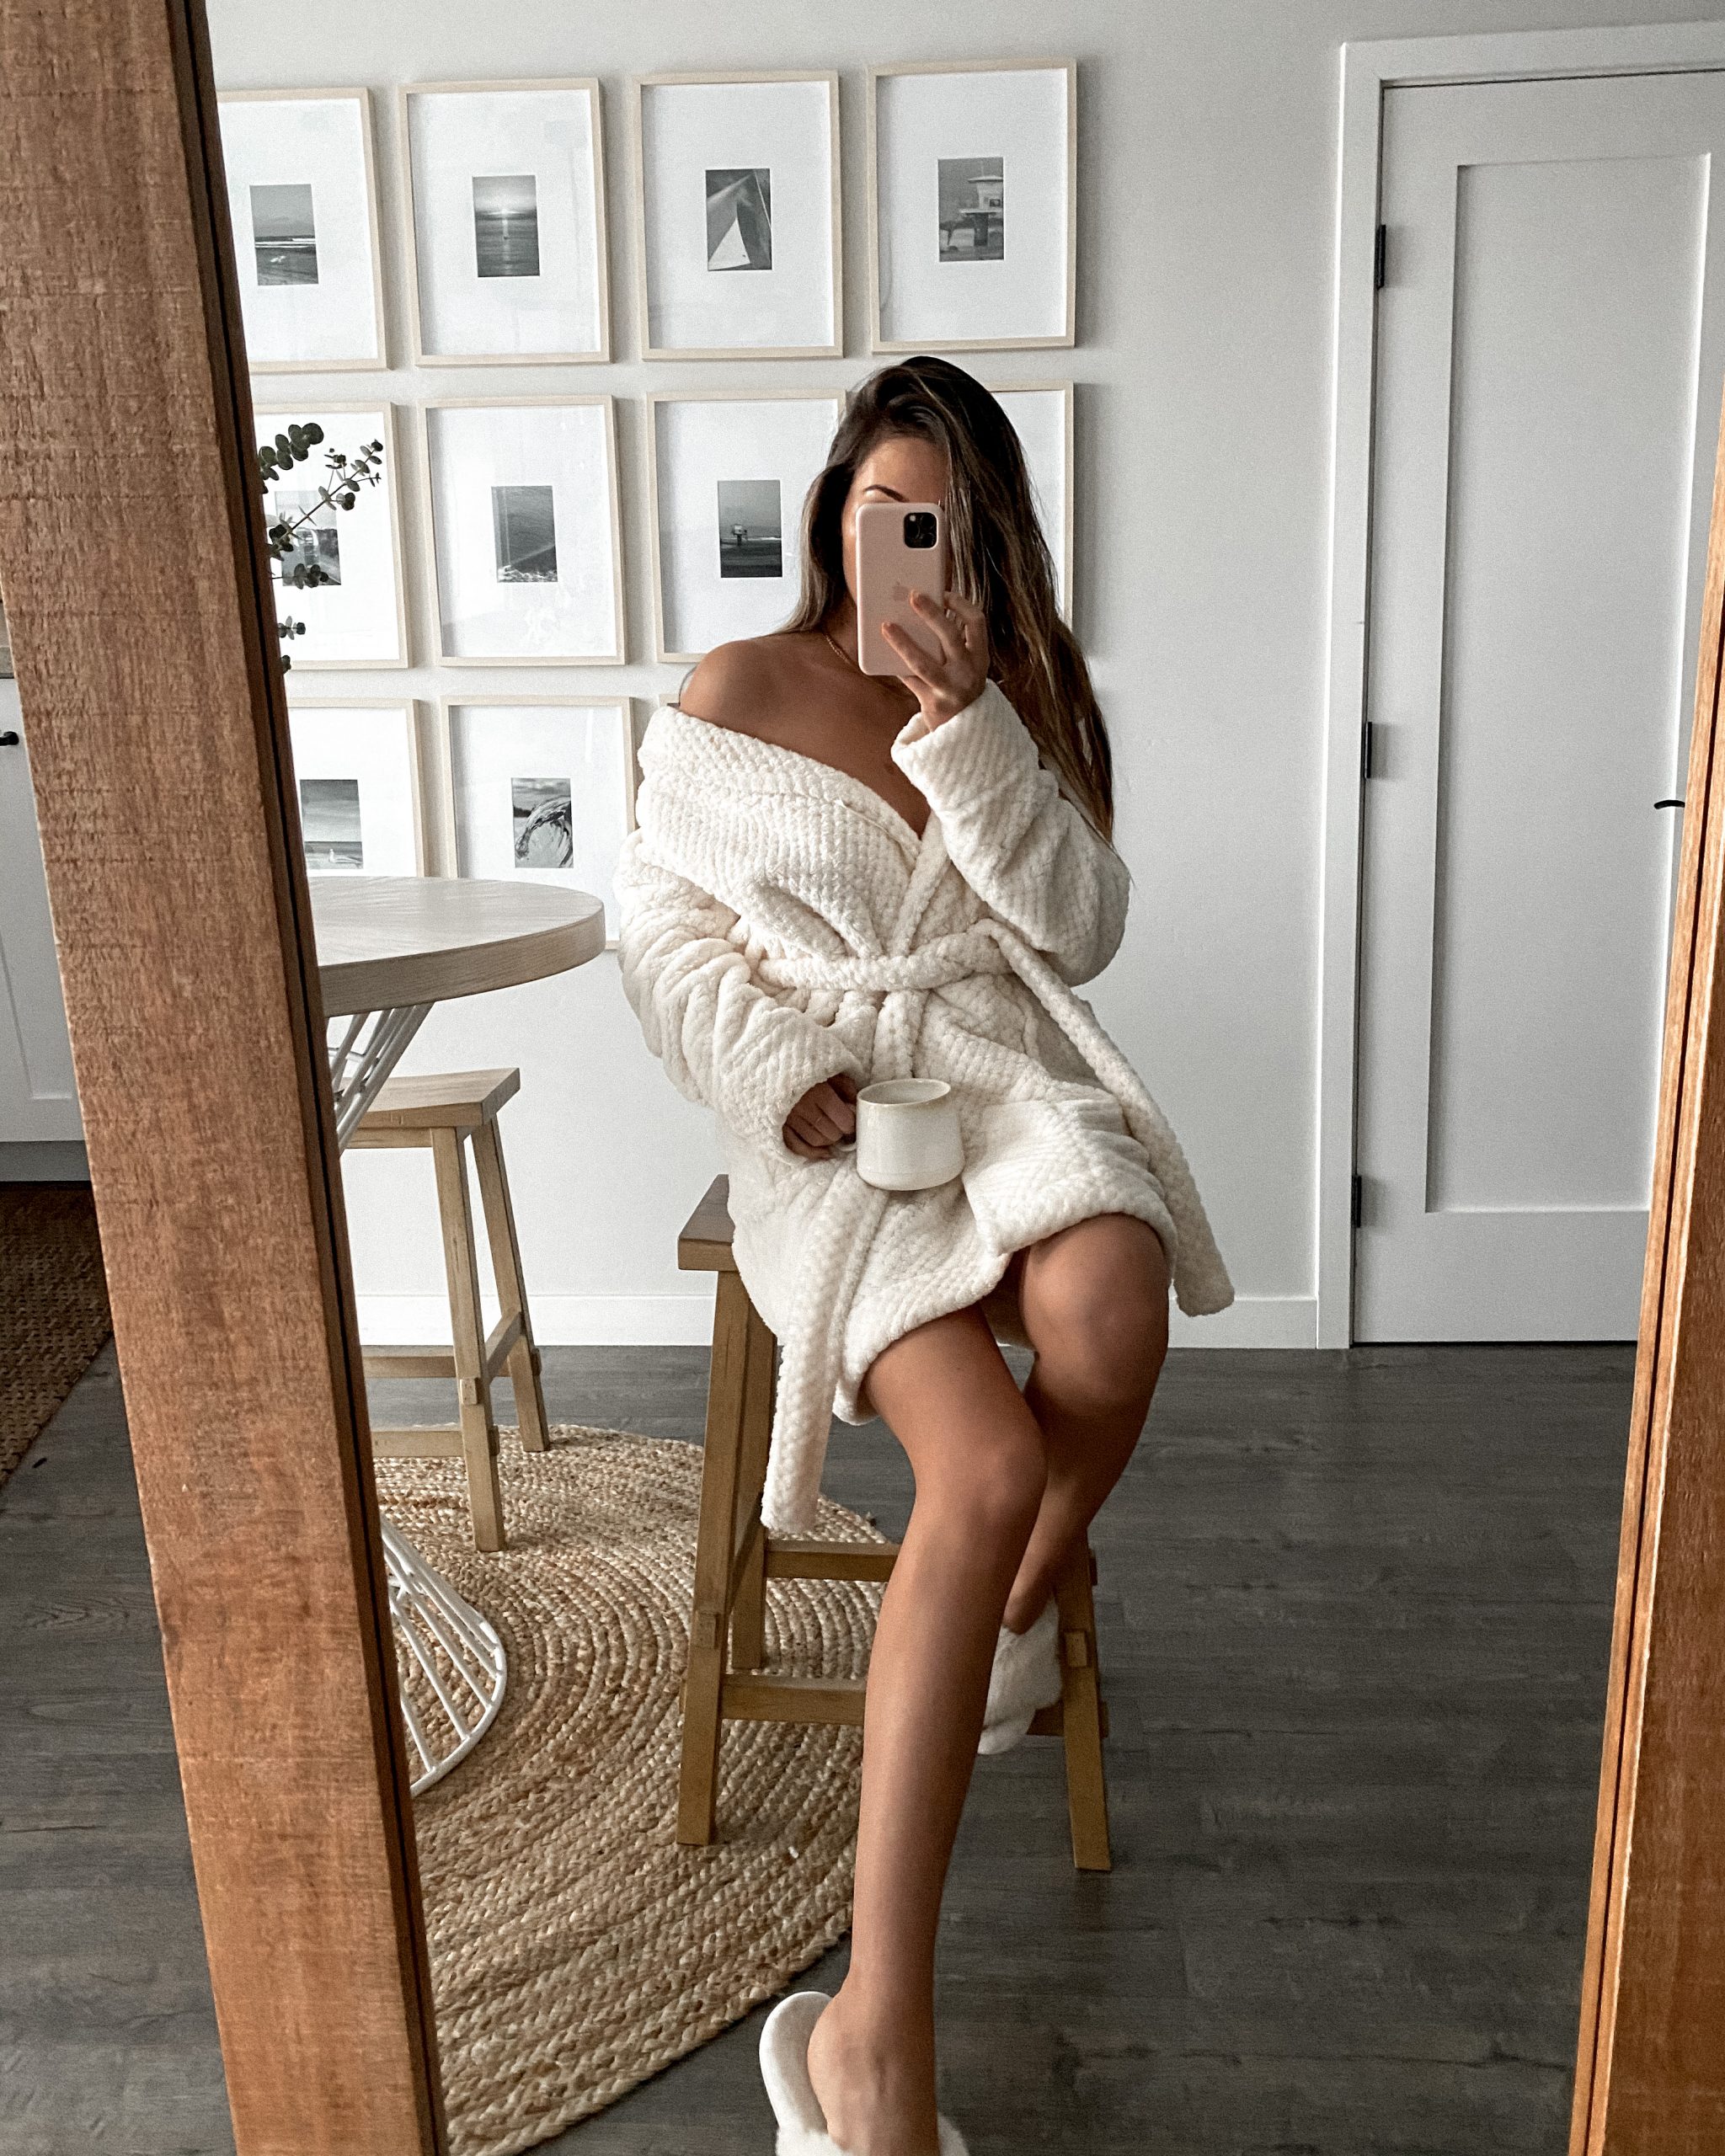 Shylah May in a robe with coffee